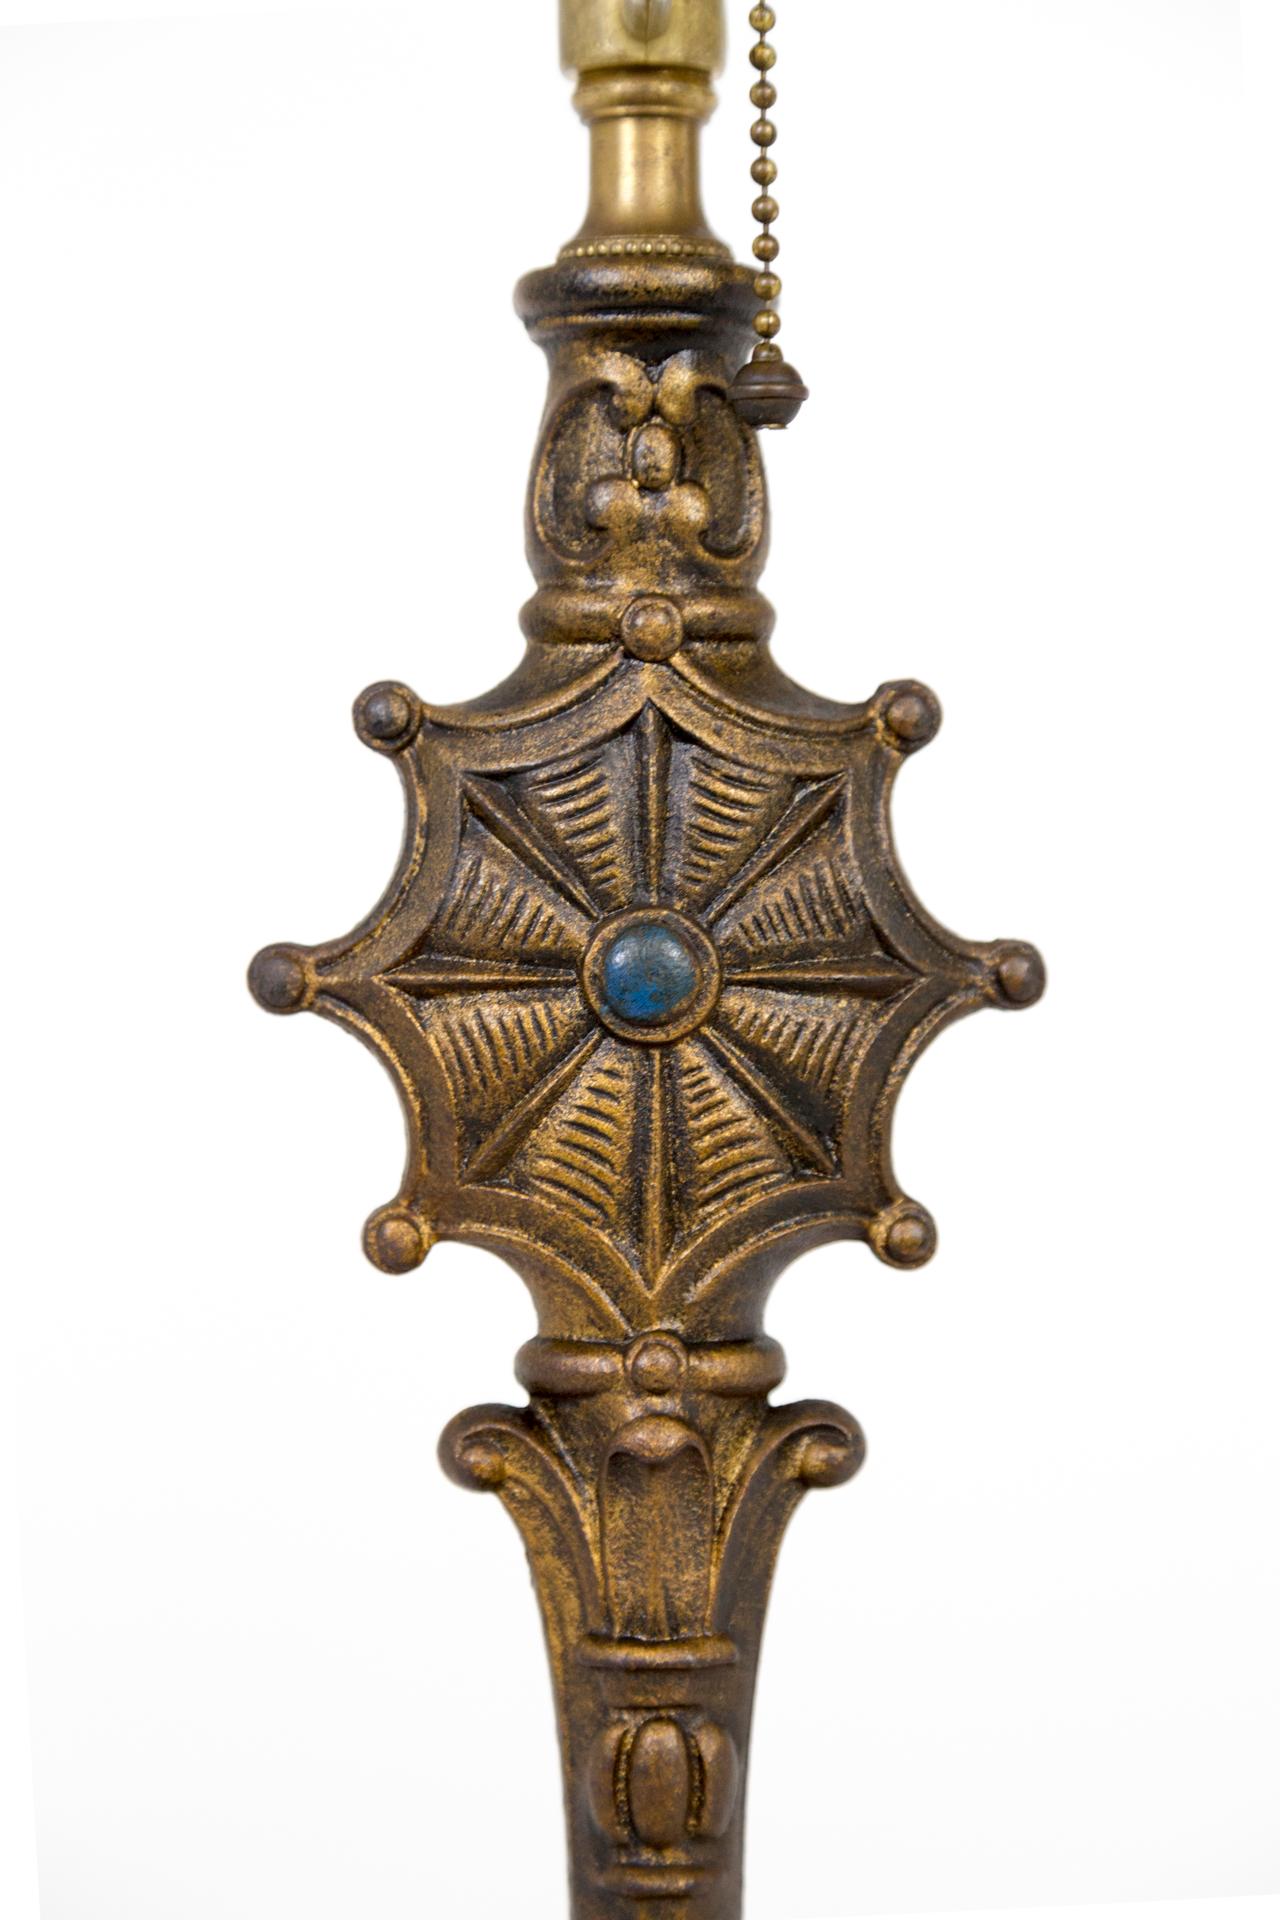 A brass table lamp with dark toned patina and gothic revival details; a radial spider web shape on the stem with a deep blue center dot, and C-curves on the base. With a pull chain, double, medium base, 3-way socket, original harp and finial; newly